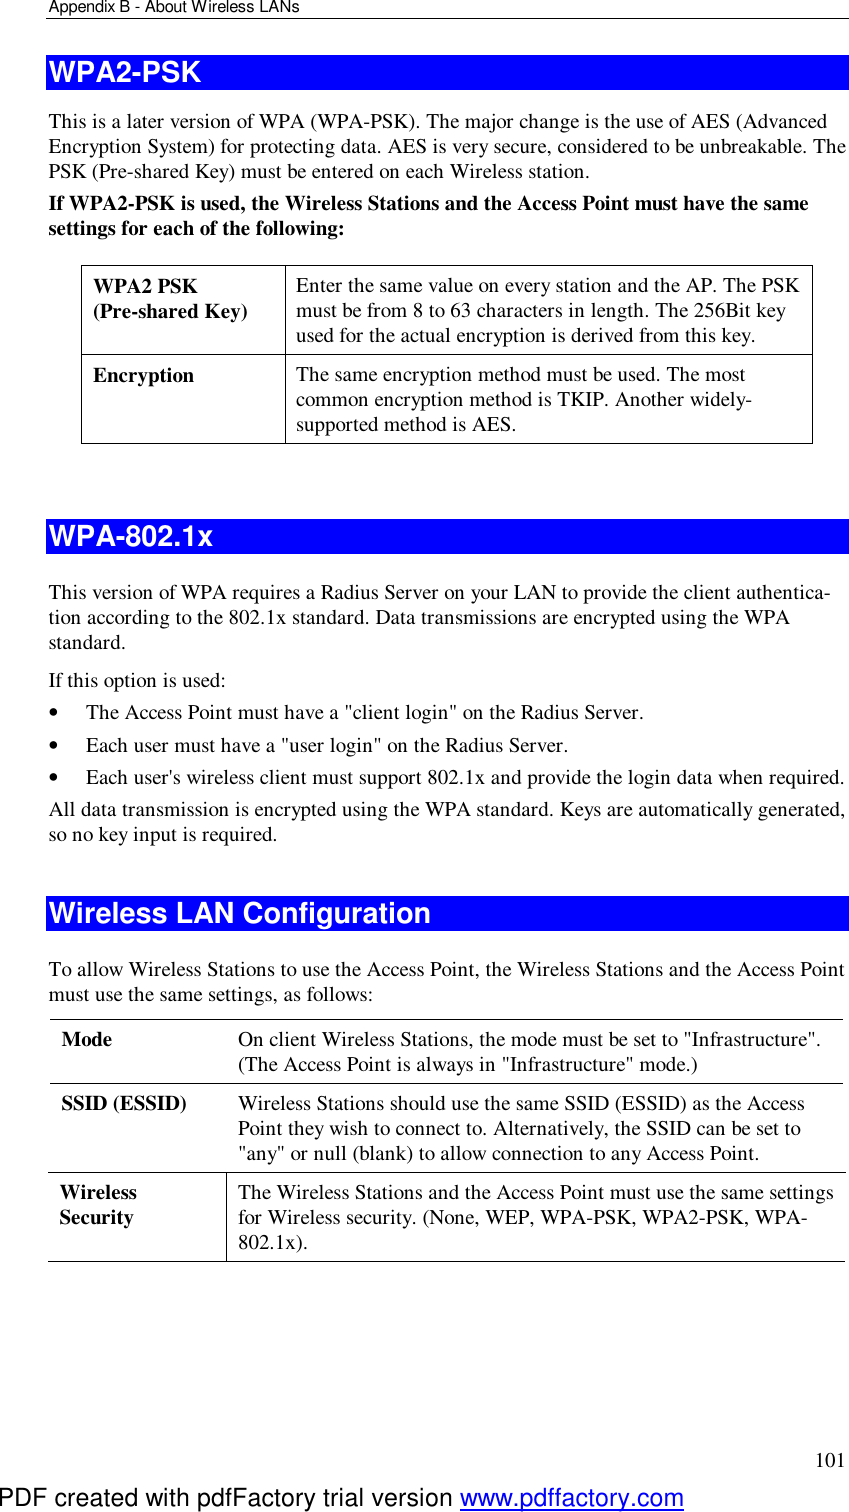 Appendix B - About Wireless LANs 101 WPA2-PSK This is a later version of WPA (WPA-PSK). The major change is the use of AES (Advanced Encryption System) for protecting data. AES is very secure, considered to be unbreakable. The PSK (Pre-shared Key) must be entered on each Wireless station. If WPA2-PSK is used, the Wireless Stations and the Access Point must have the same settings for each of the following: WPA2 PSK  (Pre-shared Key)  Enter the same value on every station and the AP. The PSK must be from 8 to 63 characters in length. The 256Bit key used for the actual encryption is derived from this key. Encryption  The same encryption method must be used. The most common encryption method is TKIP. Another widely-supported method is AES.   WPA-802.1x This version of WPA requires a Radius Server on your LAN to provide the client authentica-tion according to the 802.1x standard. Data transmissions are encrypted using the WPA standard.  If this option is used:  •  The Access Point must have a &quot;client login&quot; on the Radius Server.  •  Each user must have a &quot;user login&quot; on the Radius Server.  •  Each user&apos;s wireless client must support 802.1x and provide the login data when required.  All data transmission is encrypted using the WPA standard. Keys are automatically generated, so no key input is required.  Wireless LAN Configuration To allow Wireless Stations to use the Access Point, the Wireless Stations and the Access Point must use the same settings, as follows: Mode  On client Wireless Stations, the mode must be set to &quot;Infrastructure&quot;. (The Access Point is always in &quot;Infrastructure&quot; mode.) SSID (ESSID)  Wireless Stations should use the same SSID (ESSID) as the Access Point they wish to connect to. Alternatively, the SSID can be set to &quot;any&quot; or null (blank) to allow connection to any Access Point. Wireless Security  The Wireless Stations and the Access Point must use the same settings for Wireless security. (None, WEP, WPA-PSK, WPA2-PSK, WPA-802.1x).   PDF created with pdfFactory trial version www.pdffactory.com